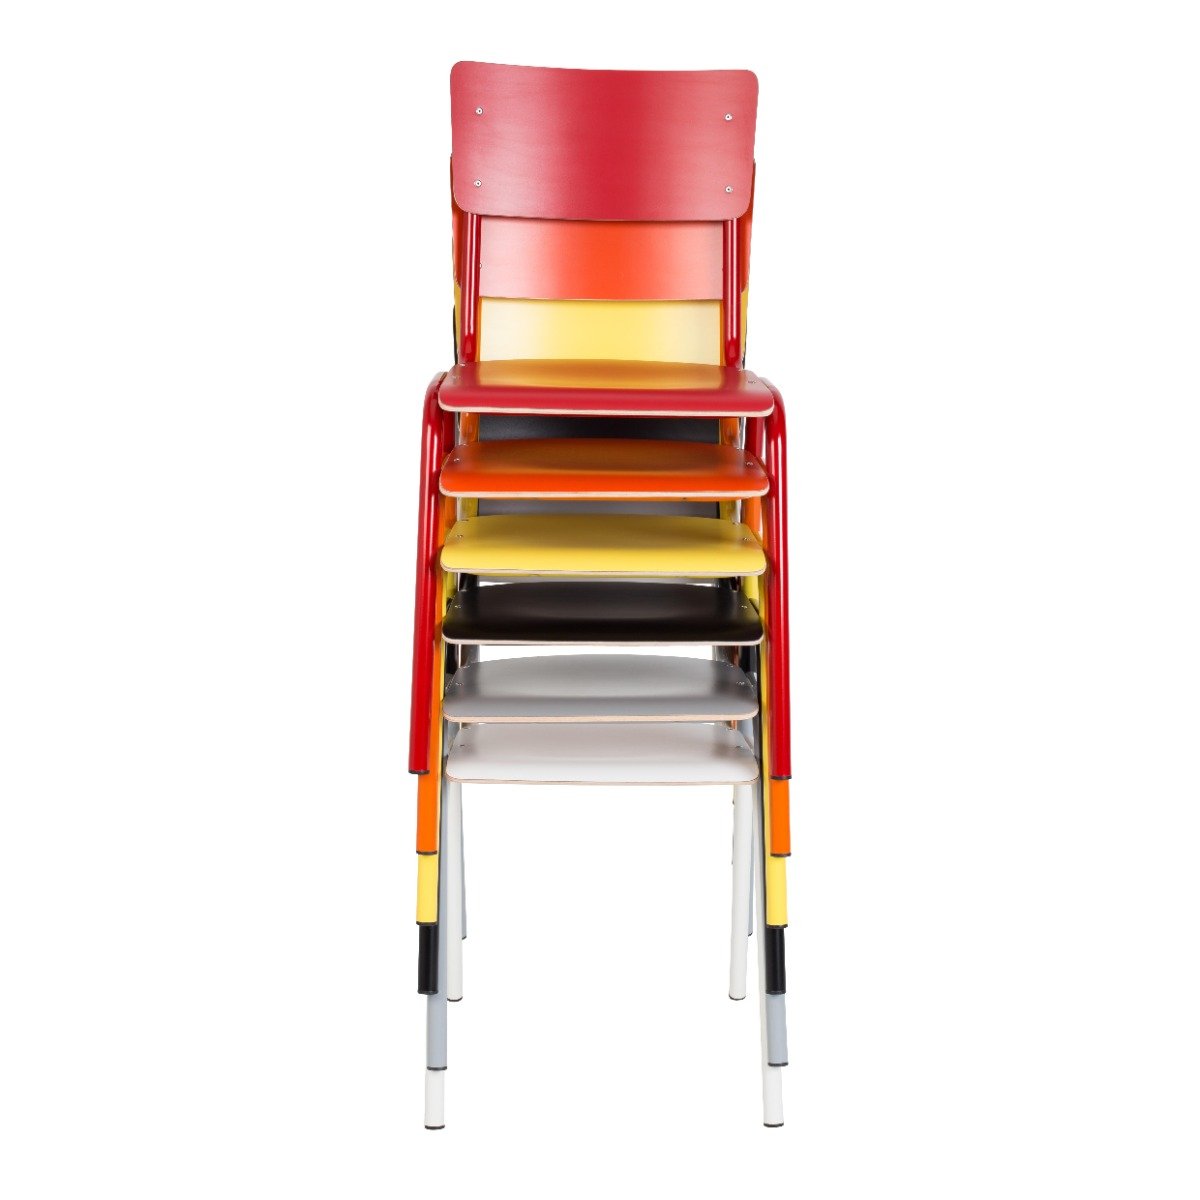 BACK TO SCHOOL chair black, Zuiver, Eye on Design